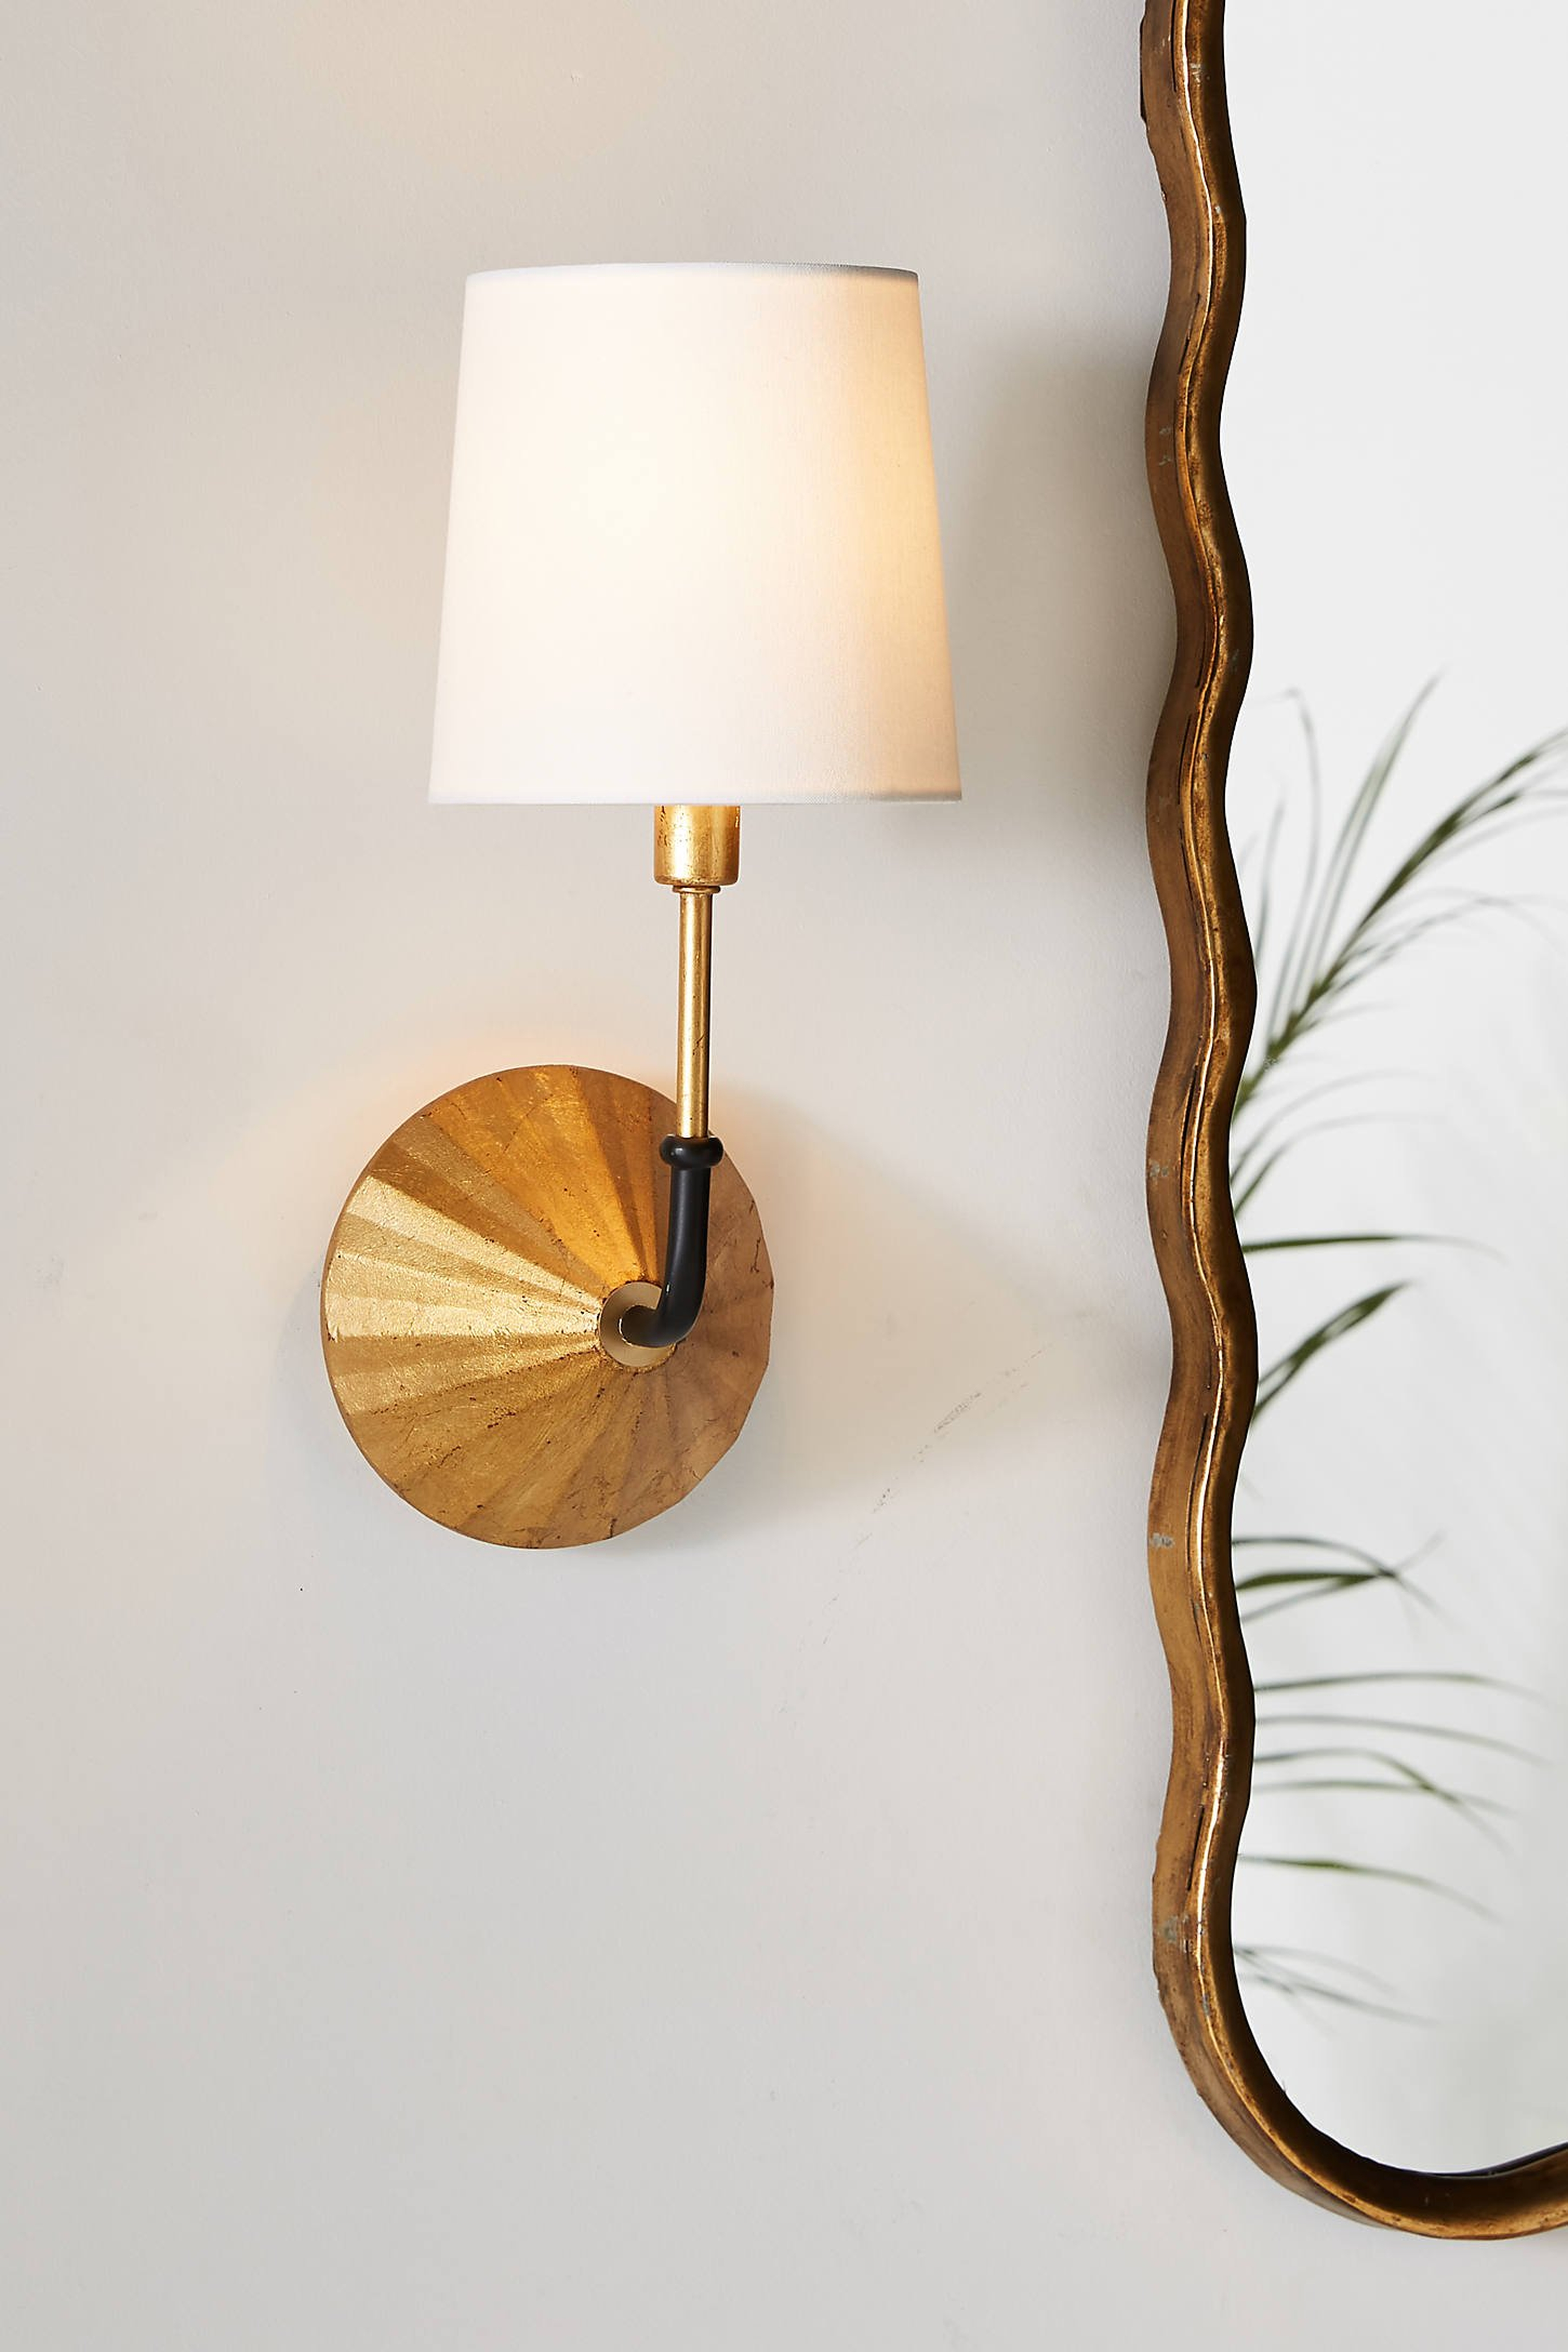 Parasol Sconce By Anthropologie in Brown - Anthropologie